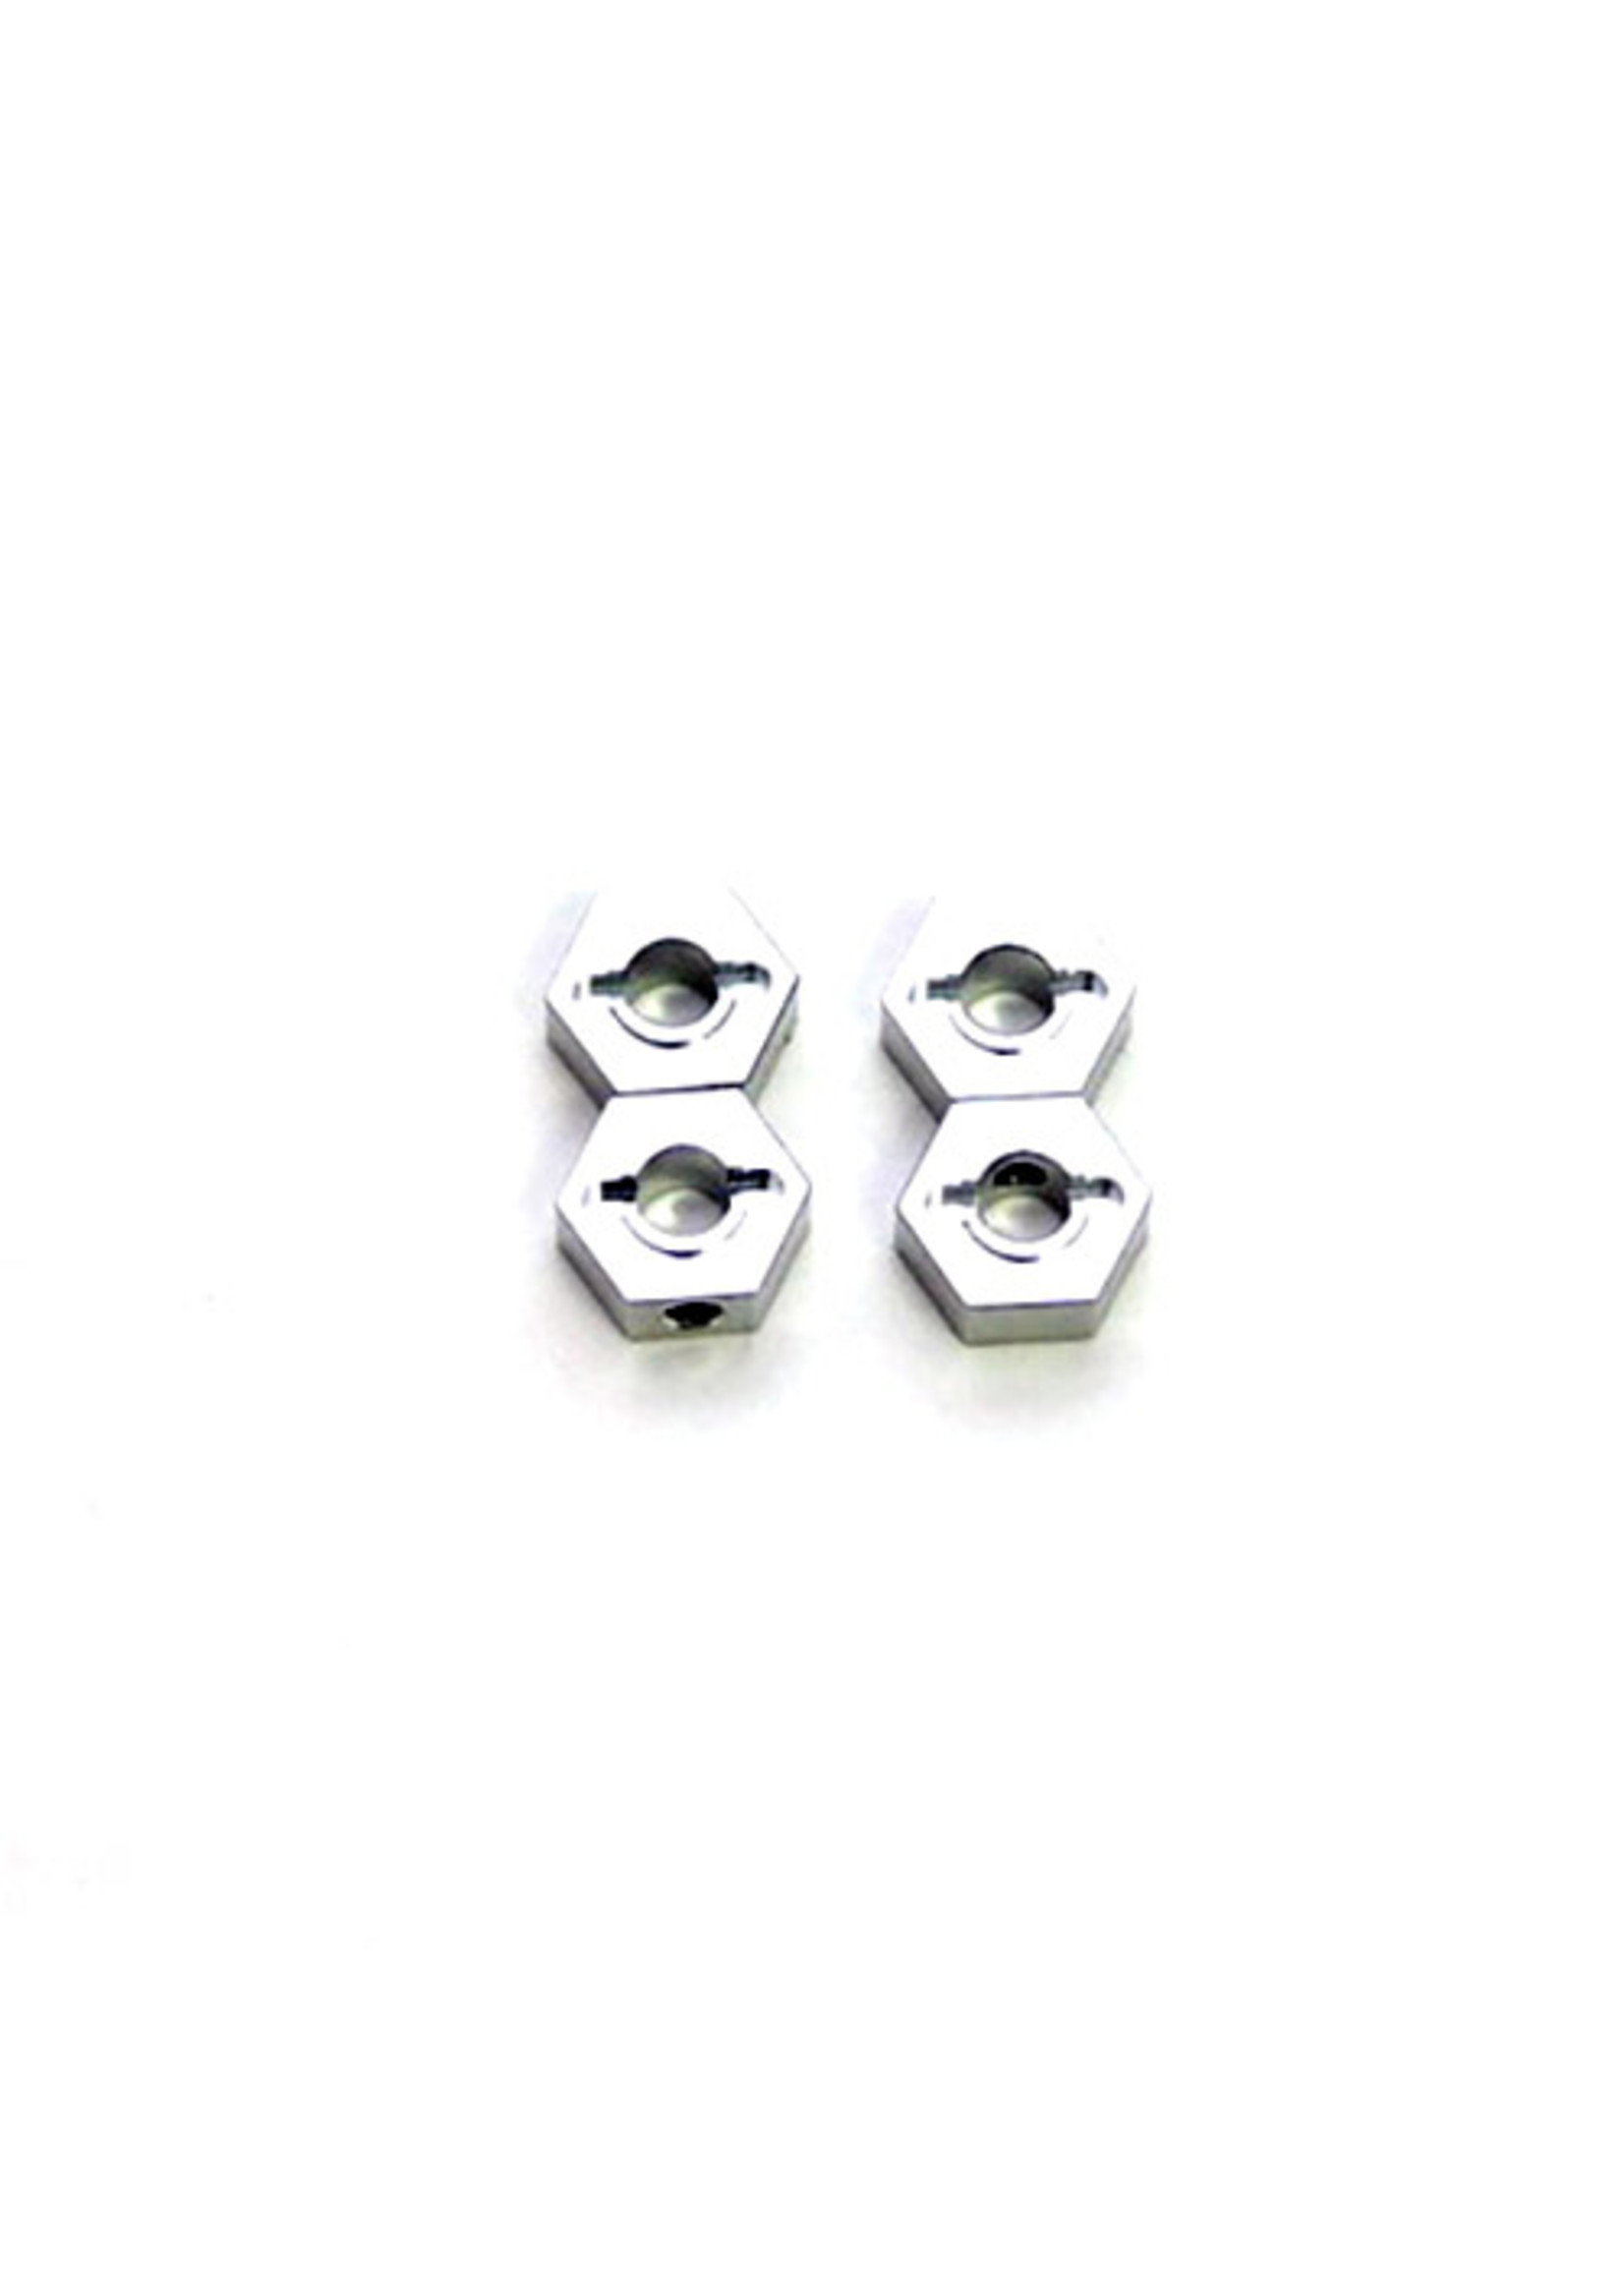 ST Racing Concepts SPTST1654-17S ST Racing Concepts CNC Machined Aluminum 17mm hex adapters for Slash 4x4/Stampede 4x4/Rally (Silver)